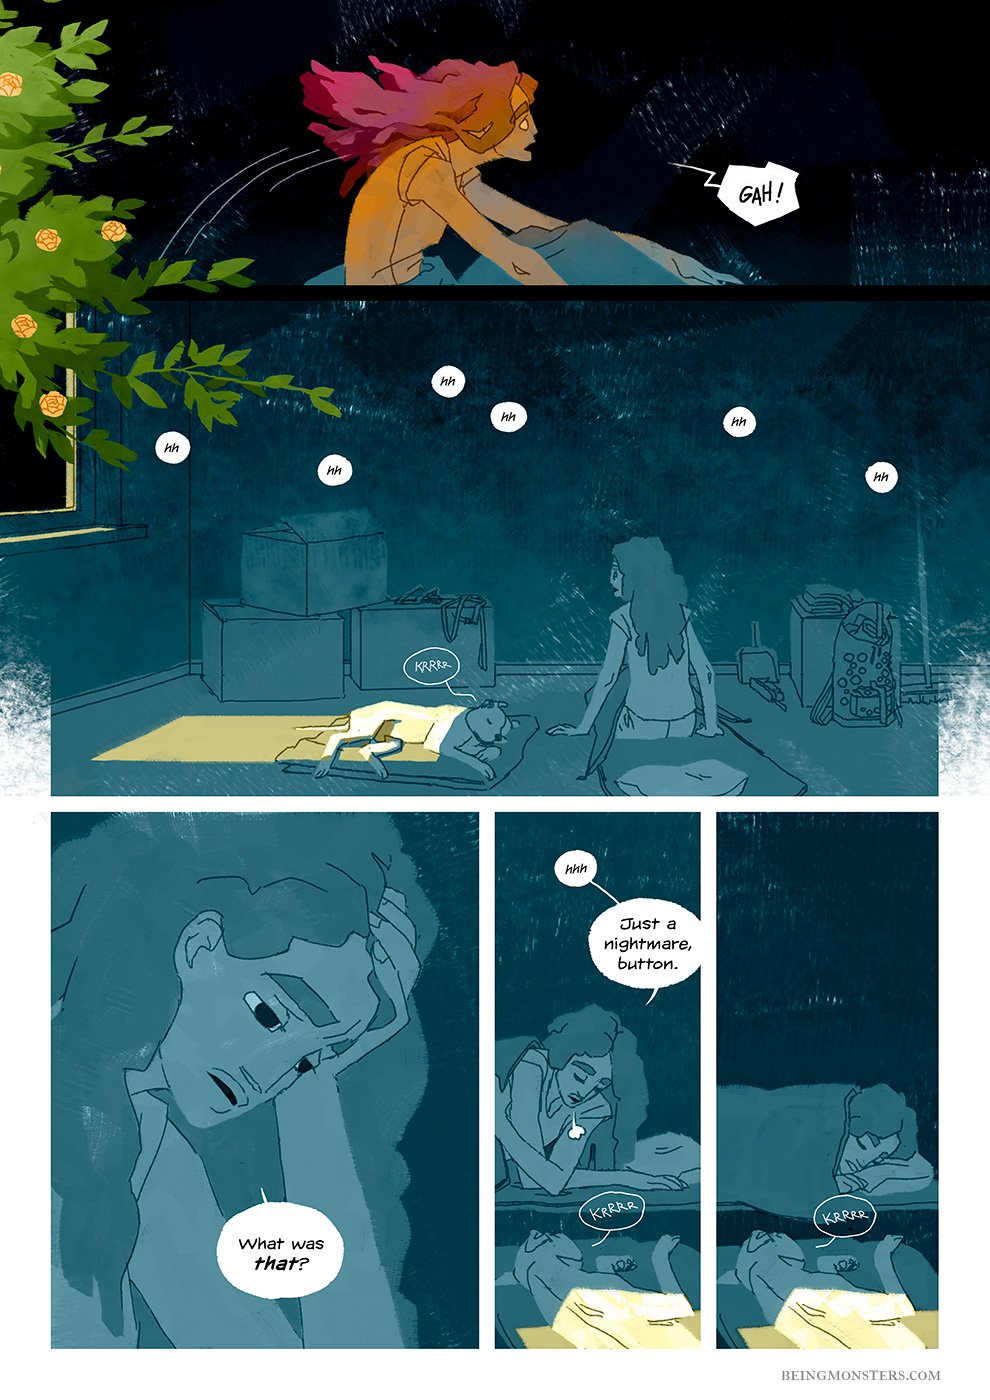 Being Monsters Book 1 Chapter 1 page 4 EN